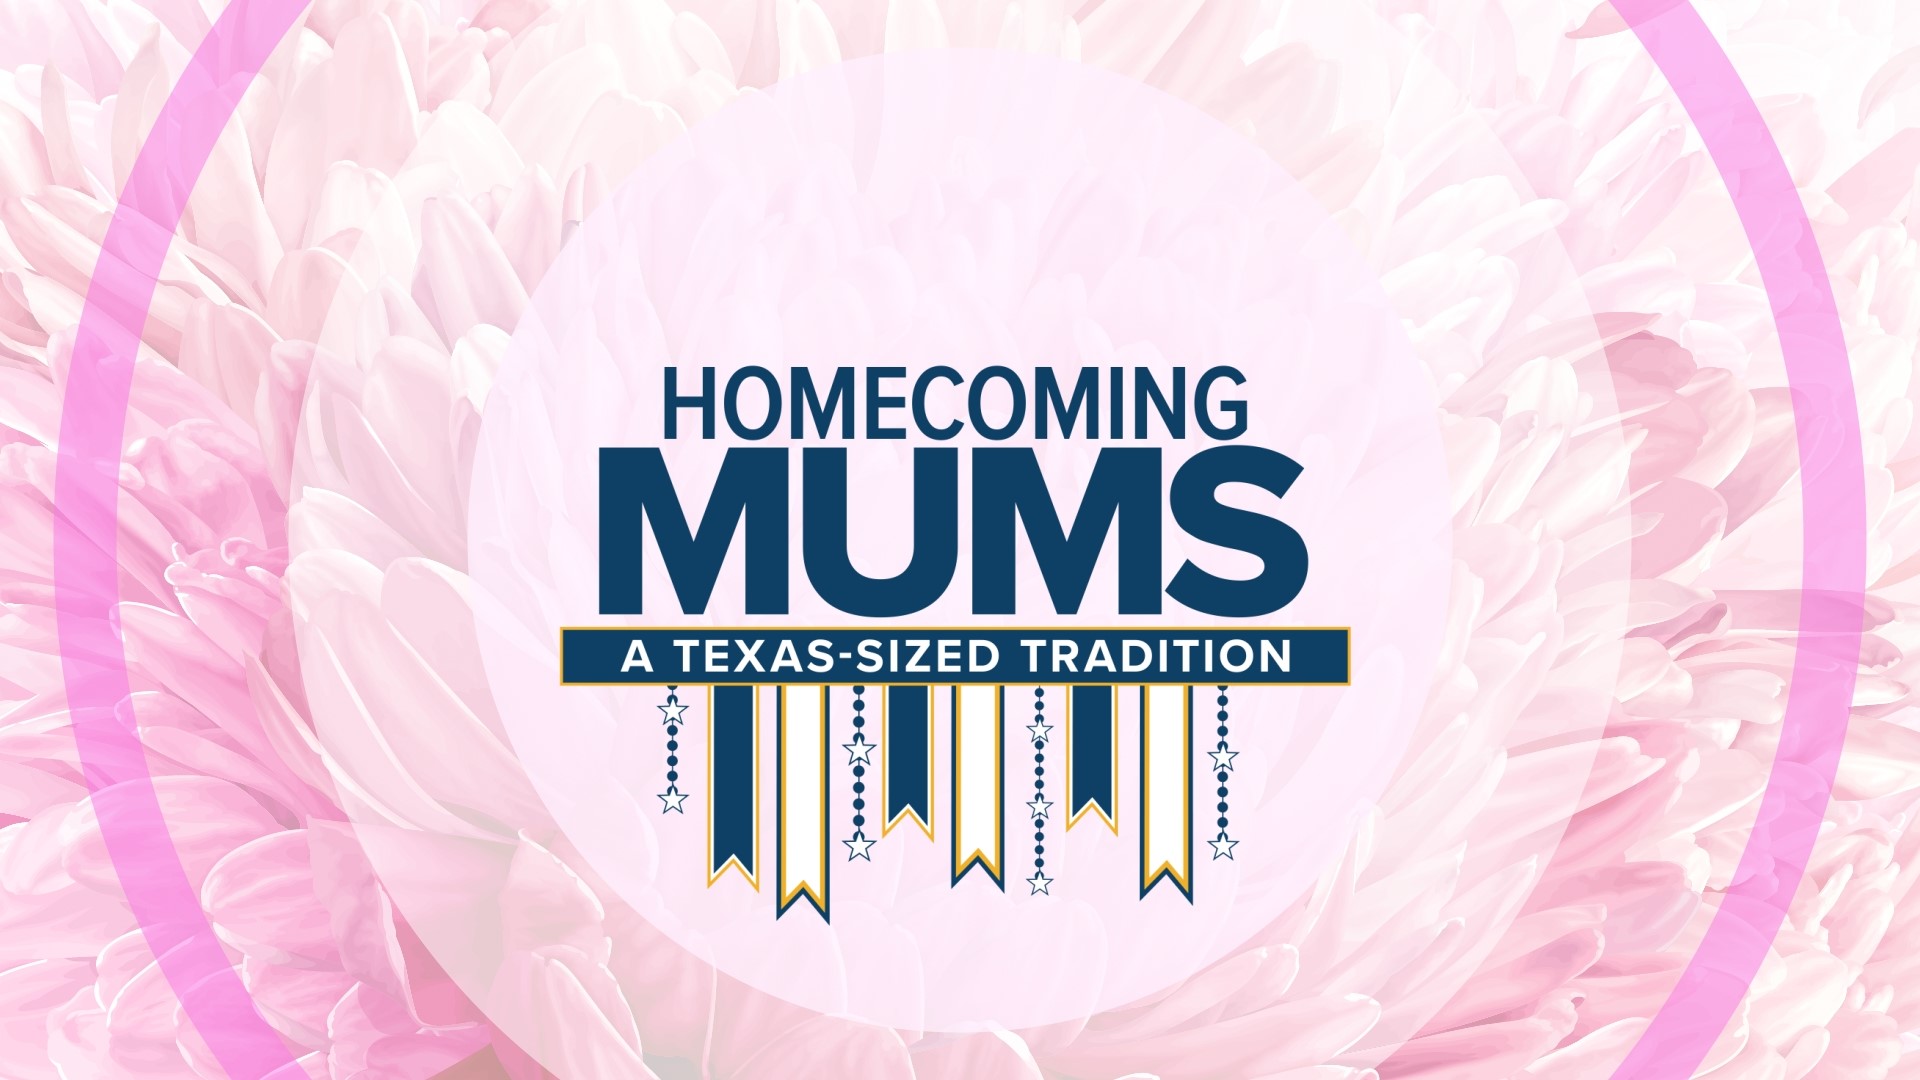 The cherished tradition is now more inclusive than it’s ever been, welcoming people from all walks of life and celebrating the diversity of Texas.